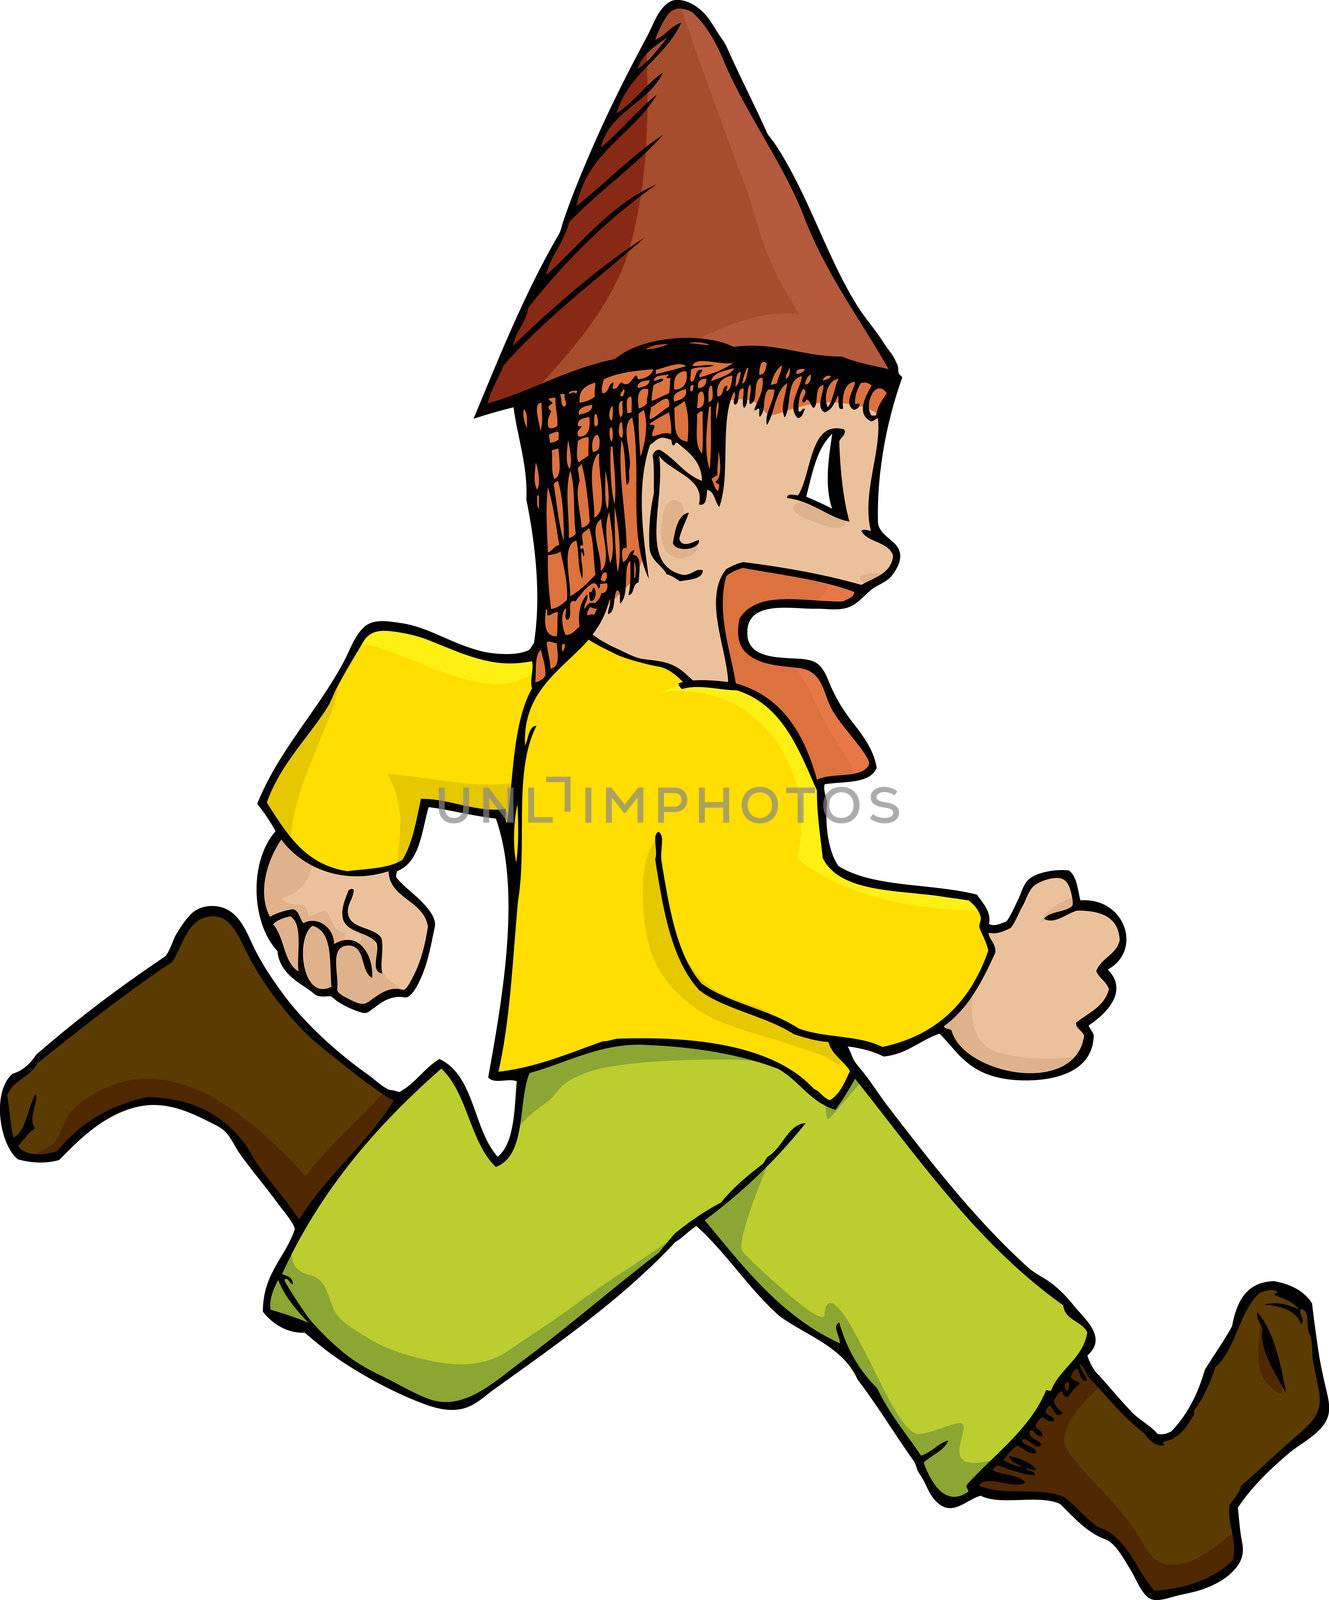 Cartoon of male gnome running over white background